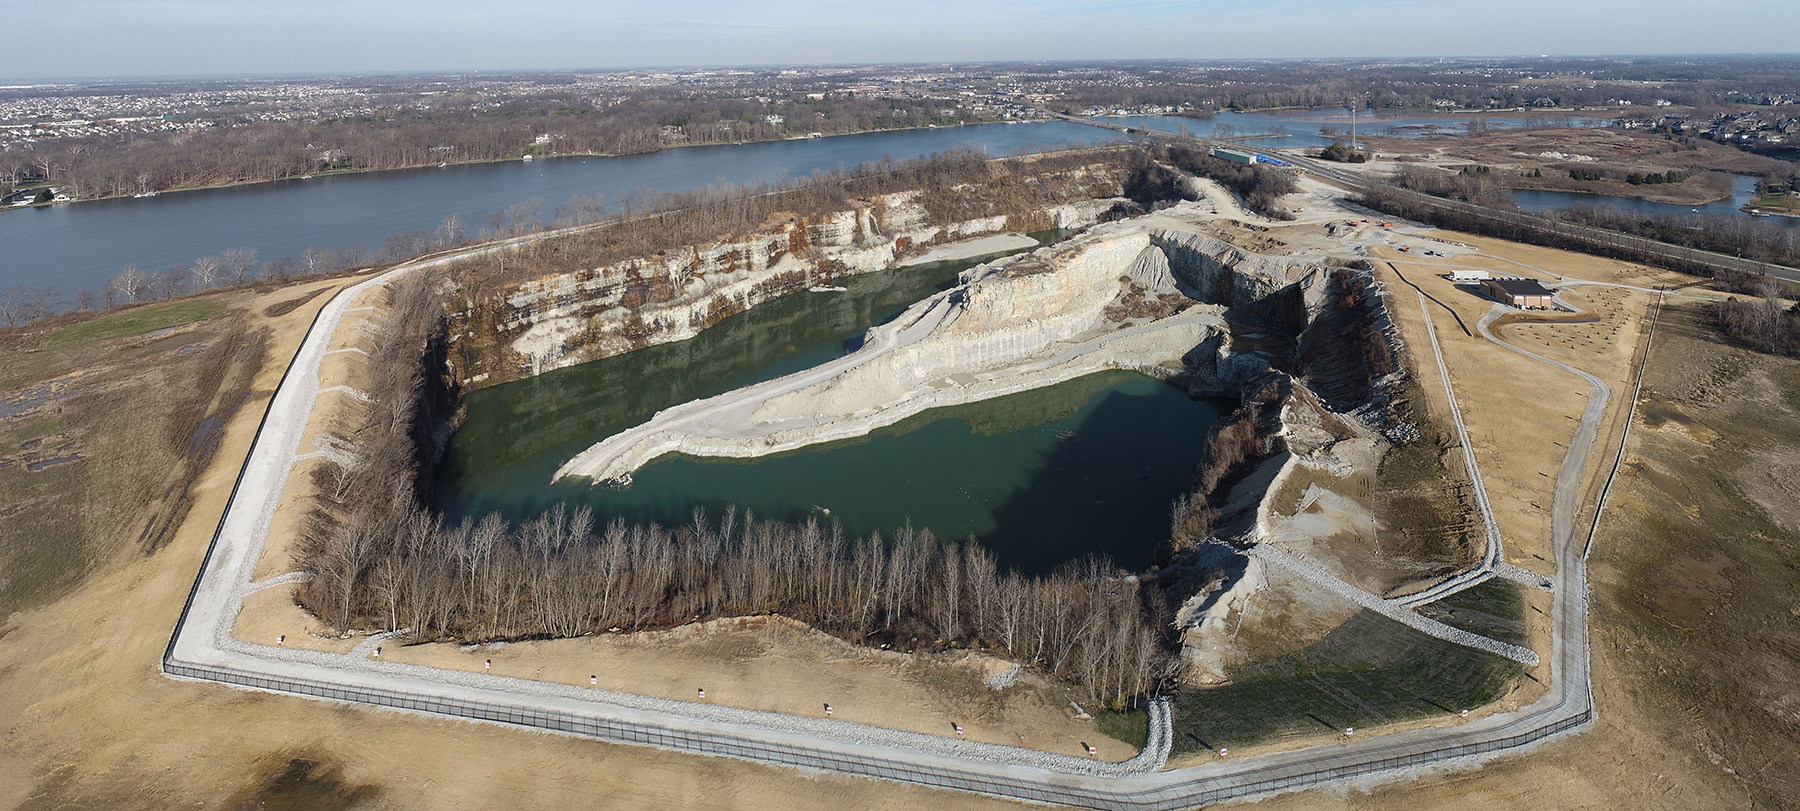 Decommissioned rock quarry showing water, trees, and sloped land